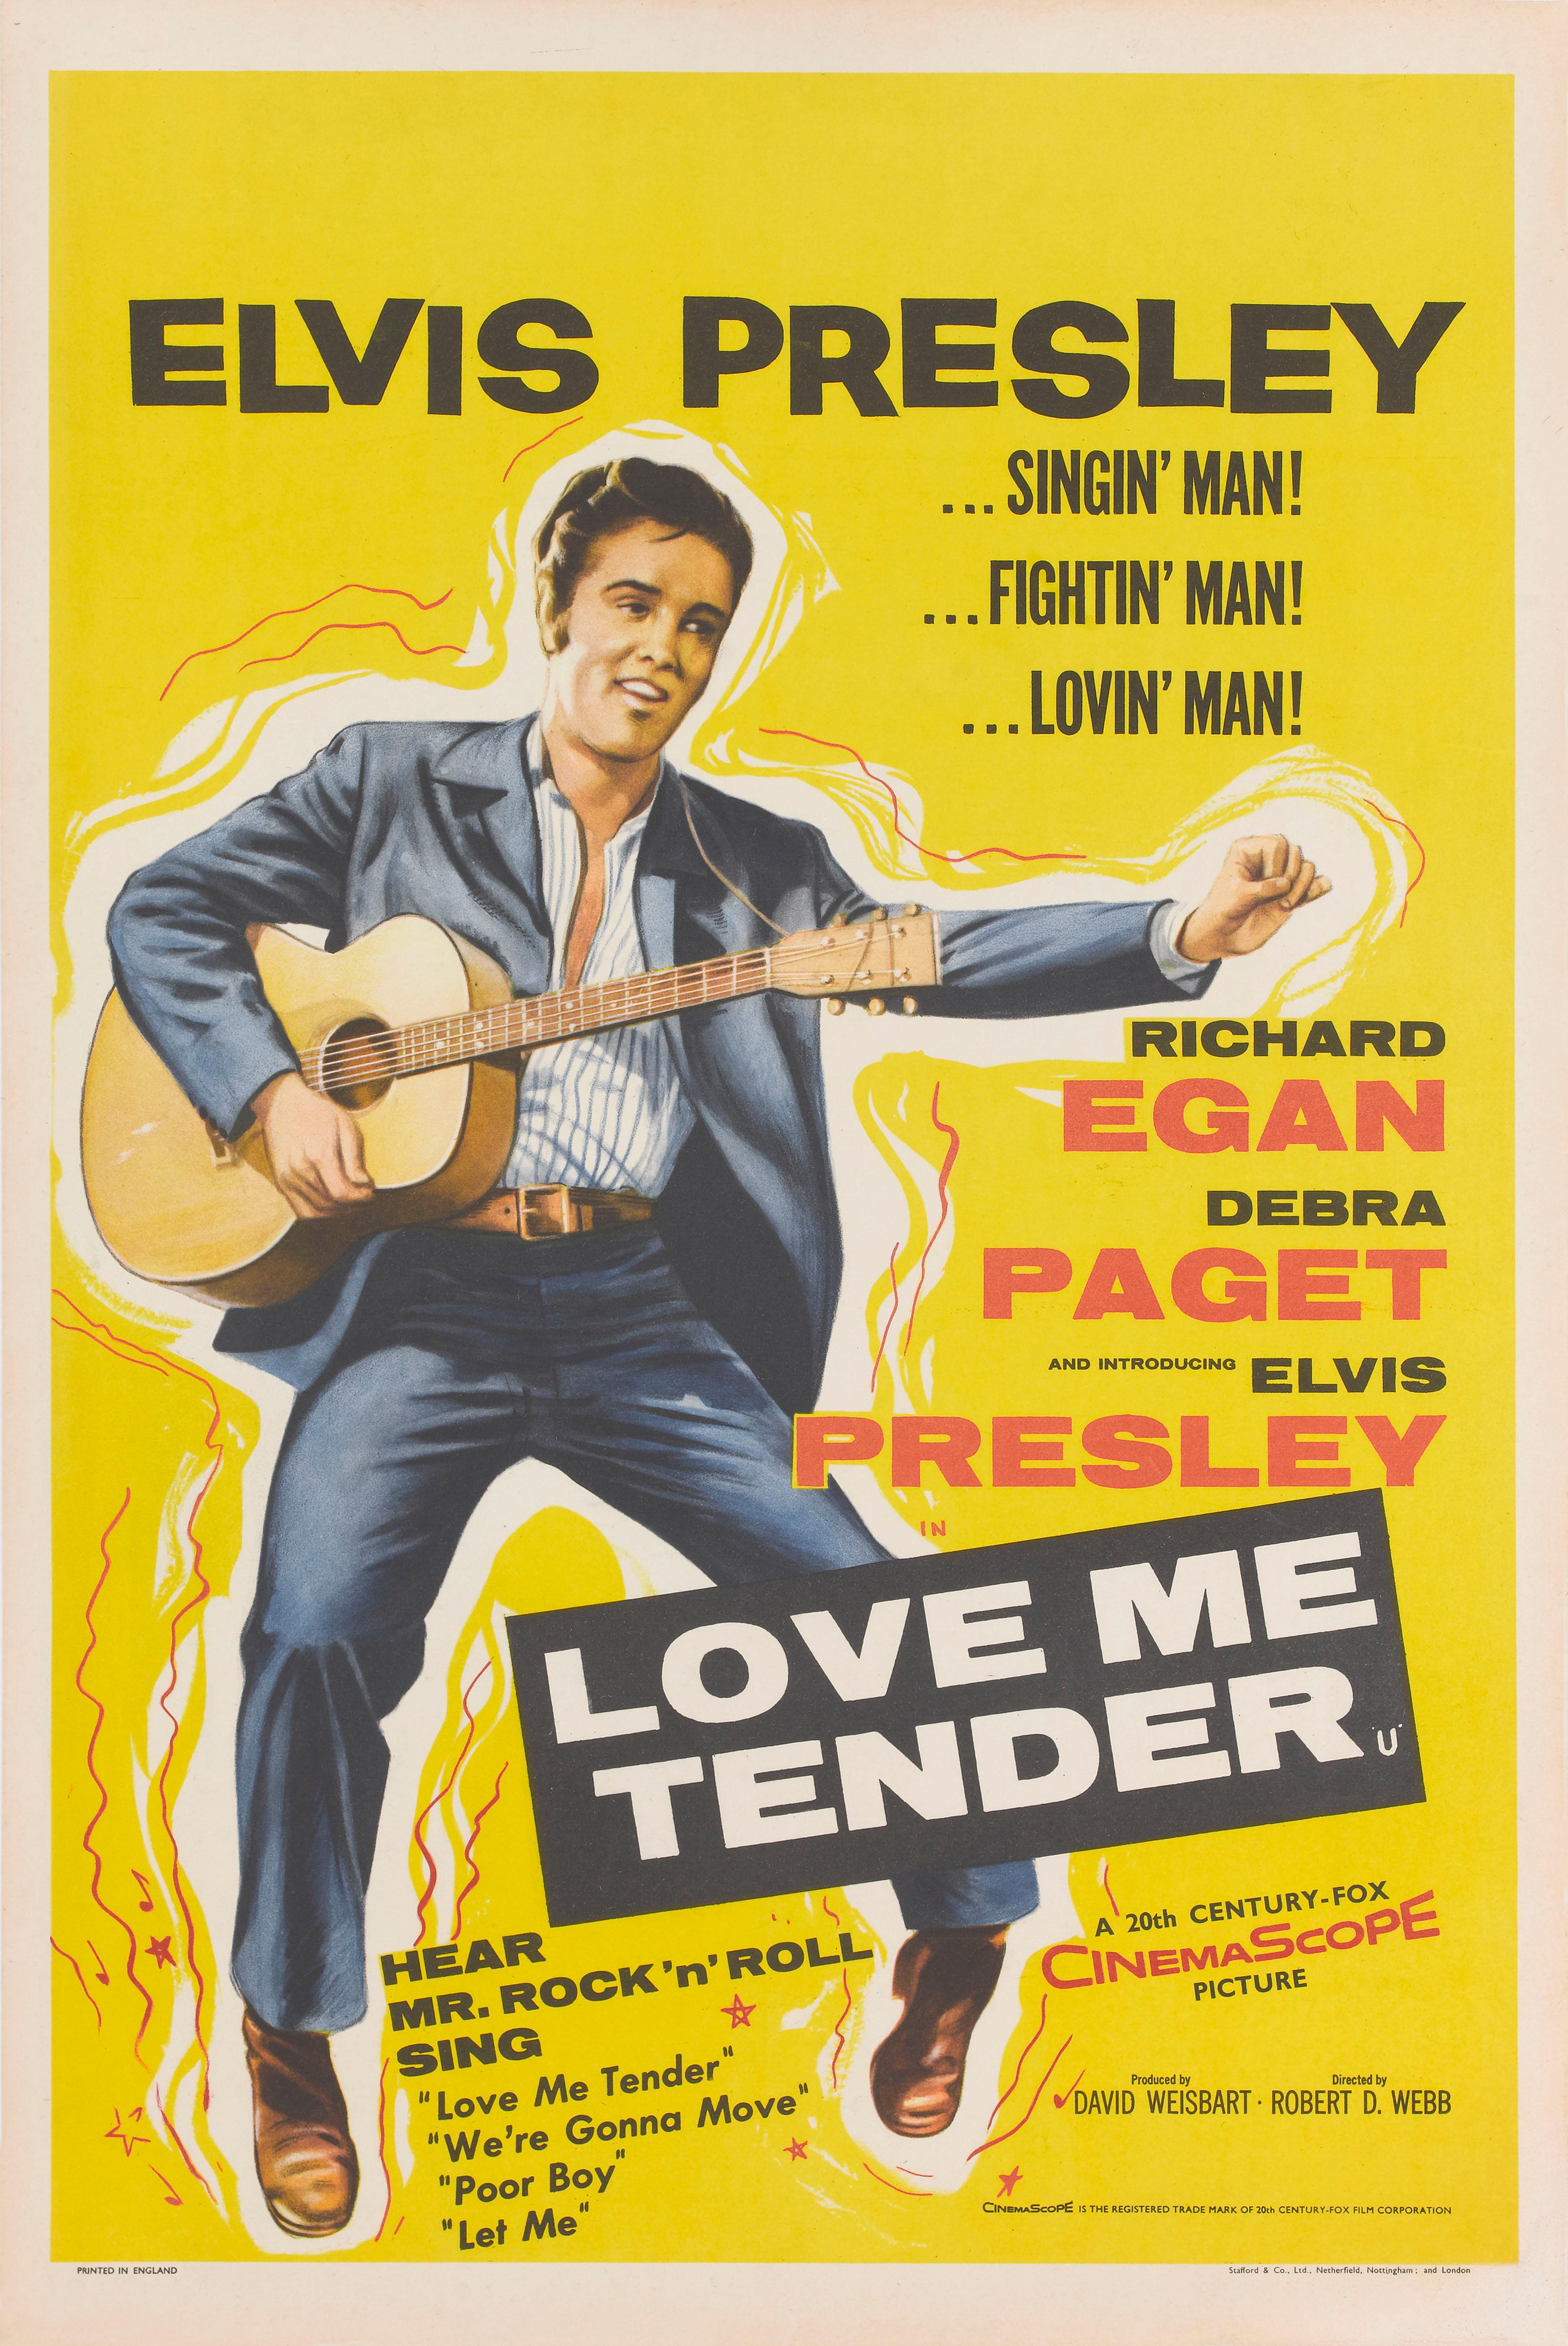 Original British film poster for Elvis Presley's Love Me Tender film in 1956. 
This poster was designed to be pasted up on London buses.
This poster is very rare in this particular size. It is unfolded and linen backed, and would be shipped rolled